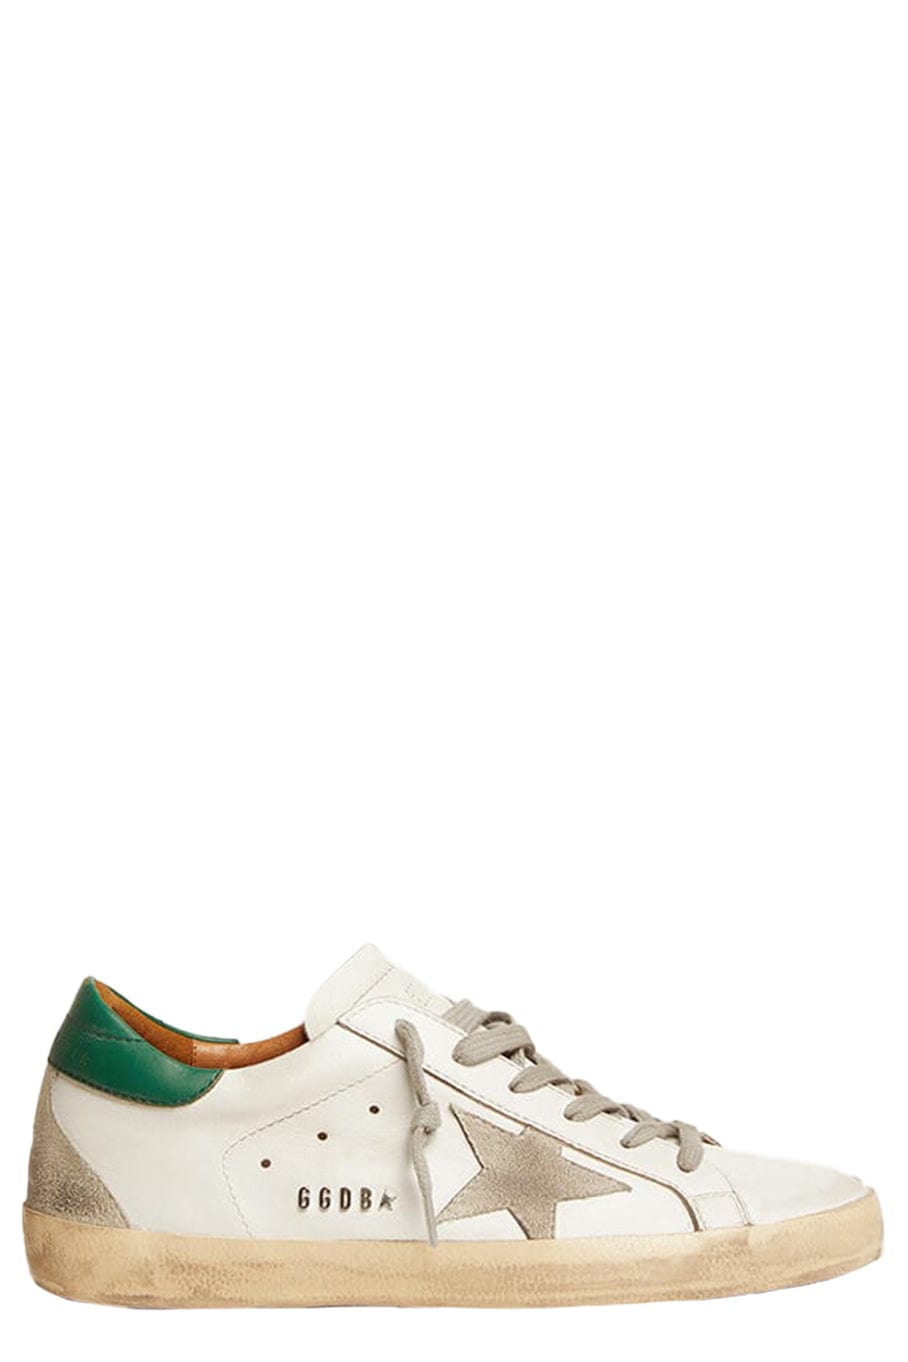 Men's Super-Star with silver heel tab and lettering